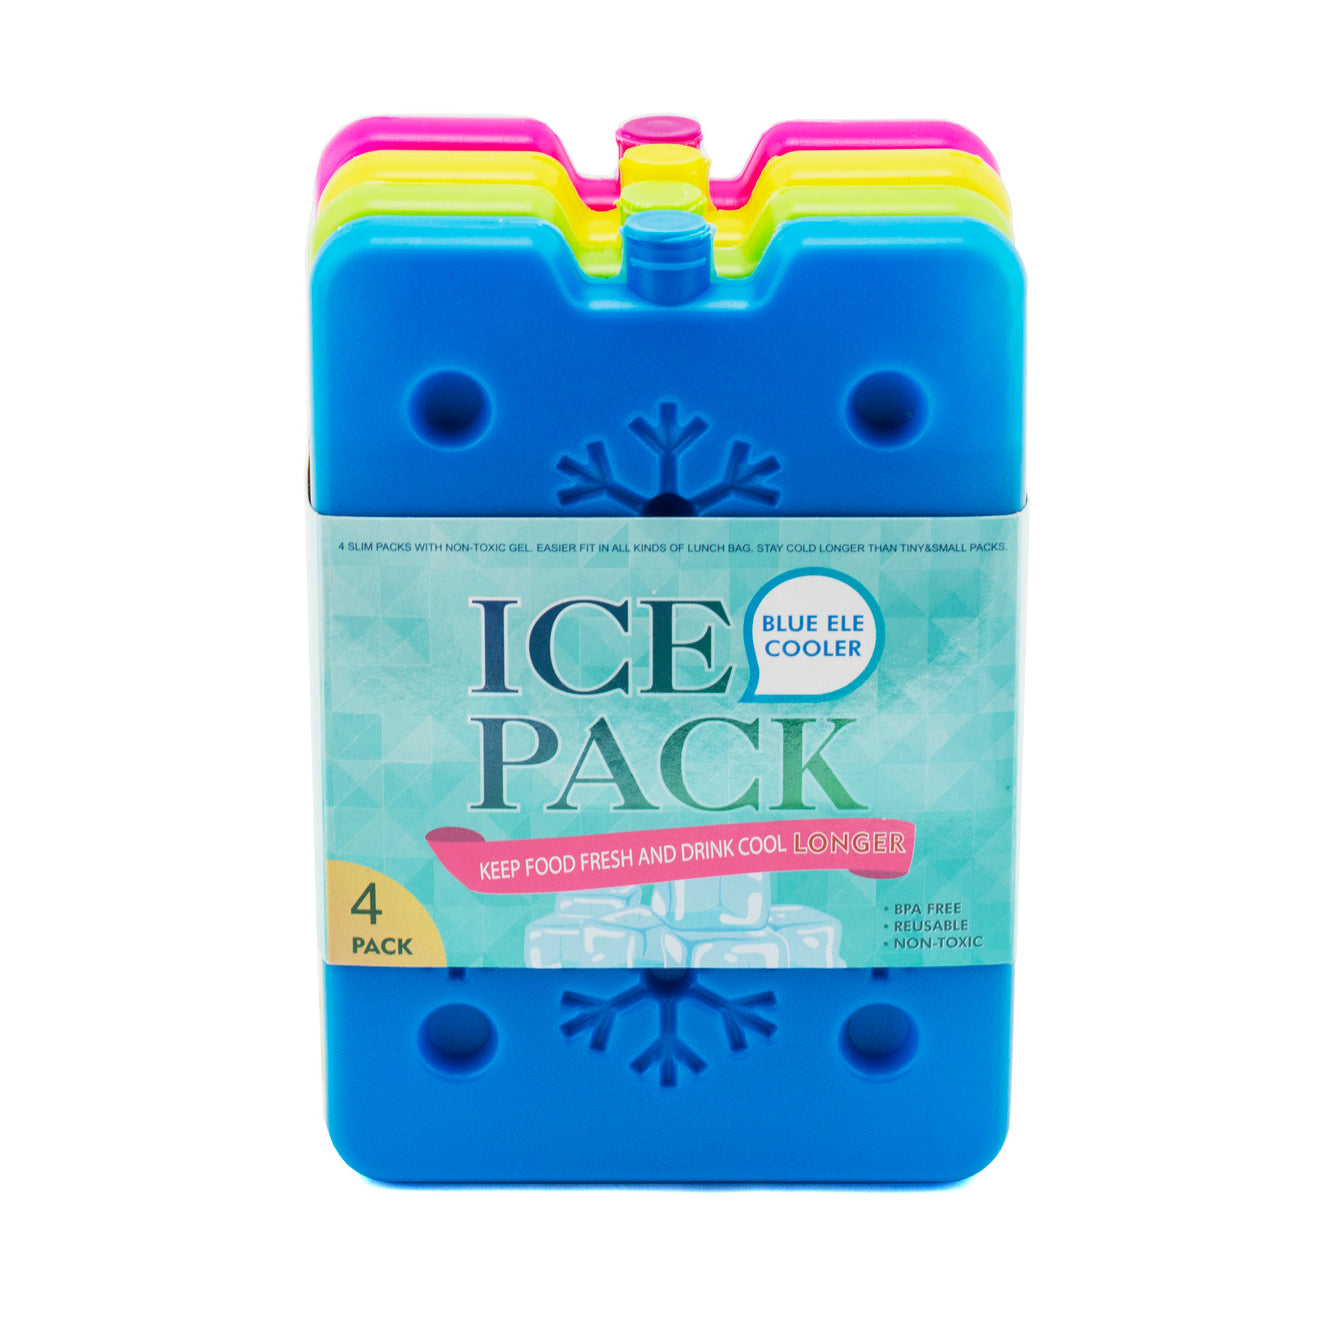 Magic Gel - 5 x Ice Packs for Lunch Box and Coolers - Small But Long Lasting - G